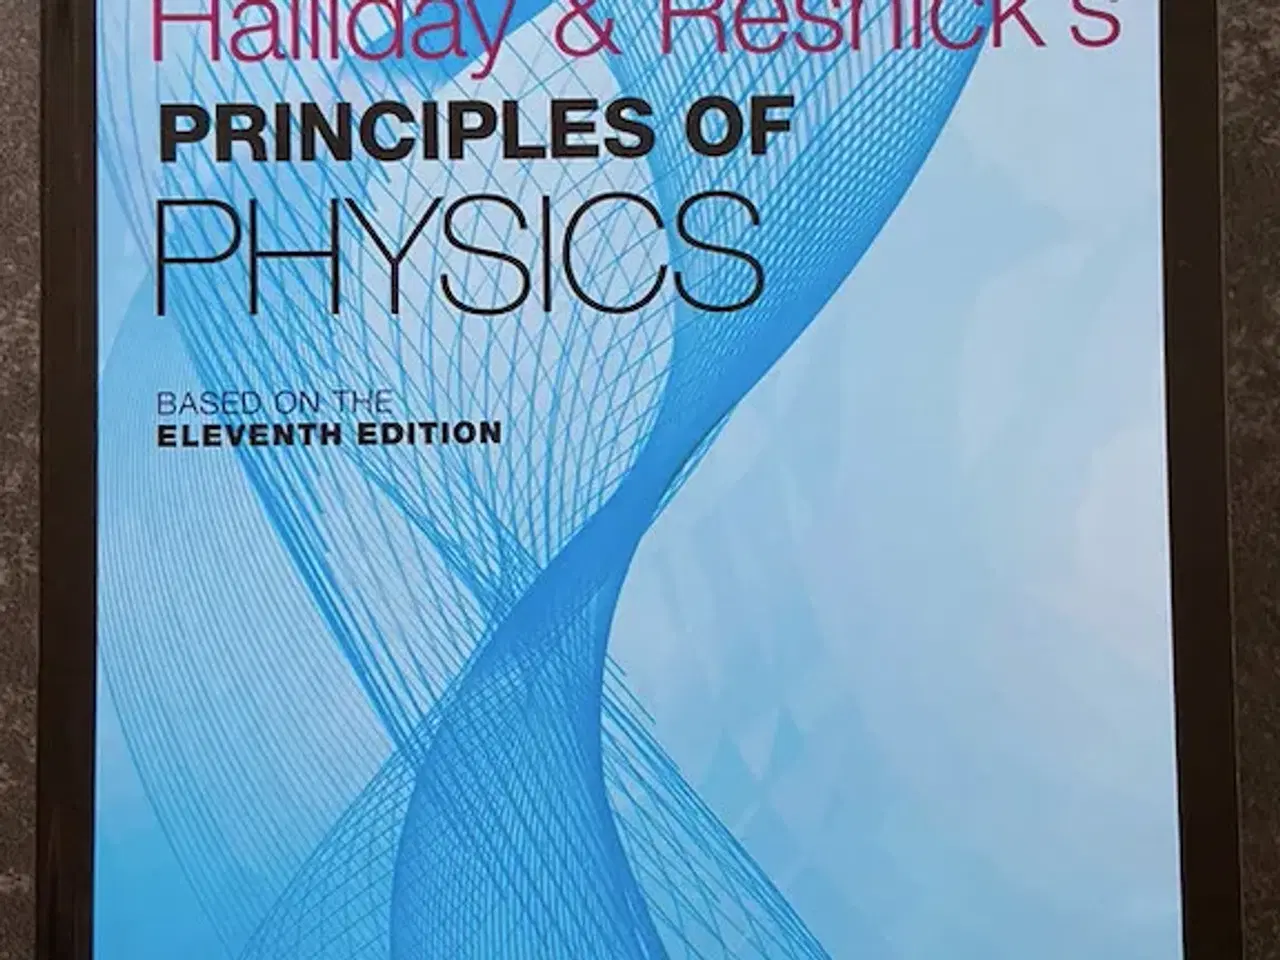 Billede 1 - Halliday and Resnick's Principles of Physics